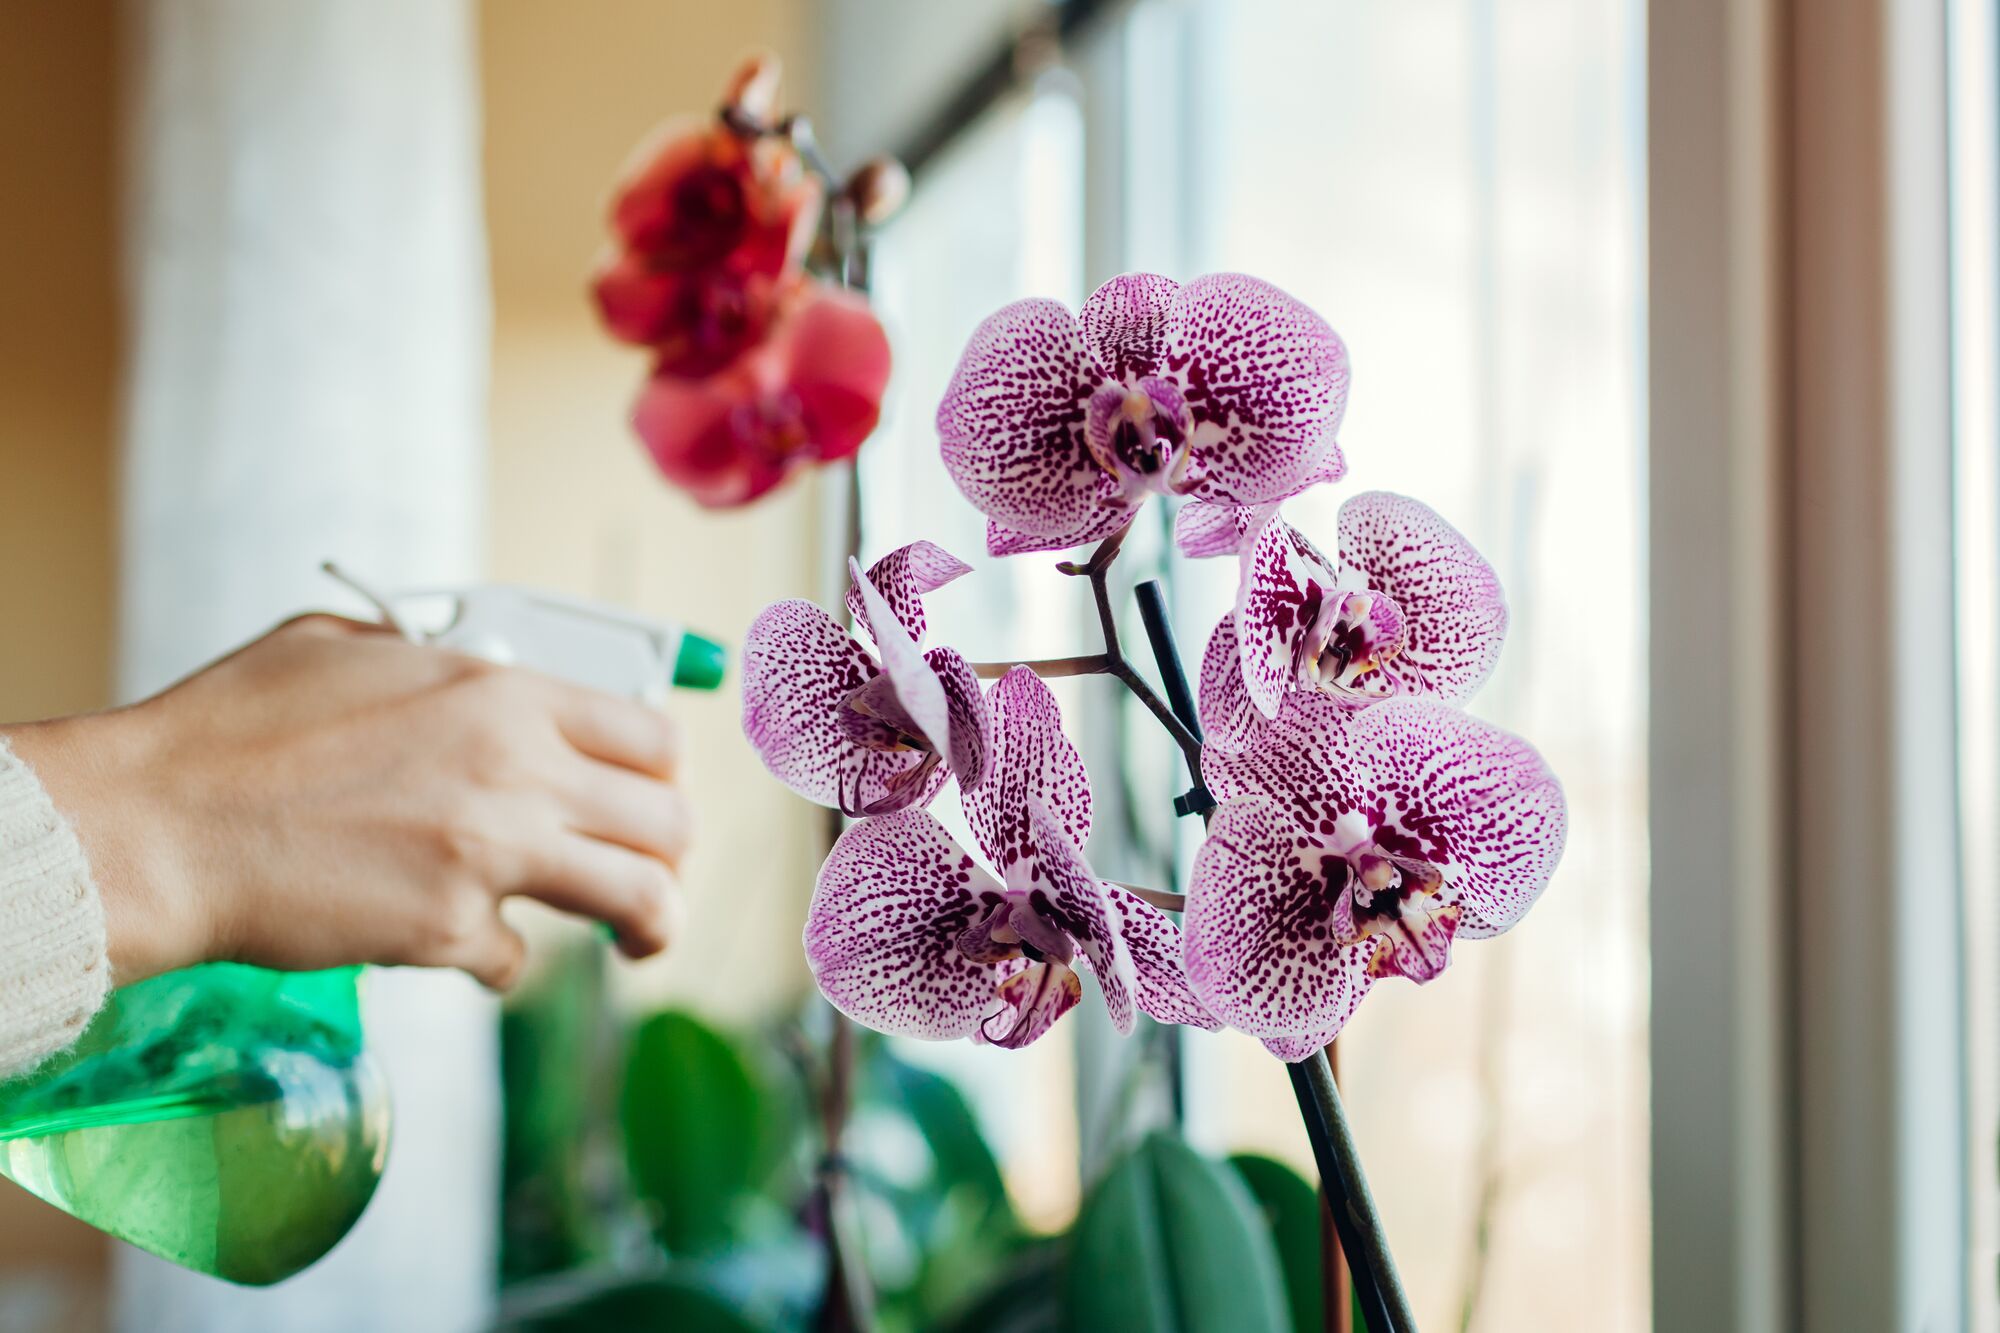 XLarge-Seezon - How to plant and care for my orchids - care water